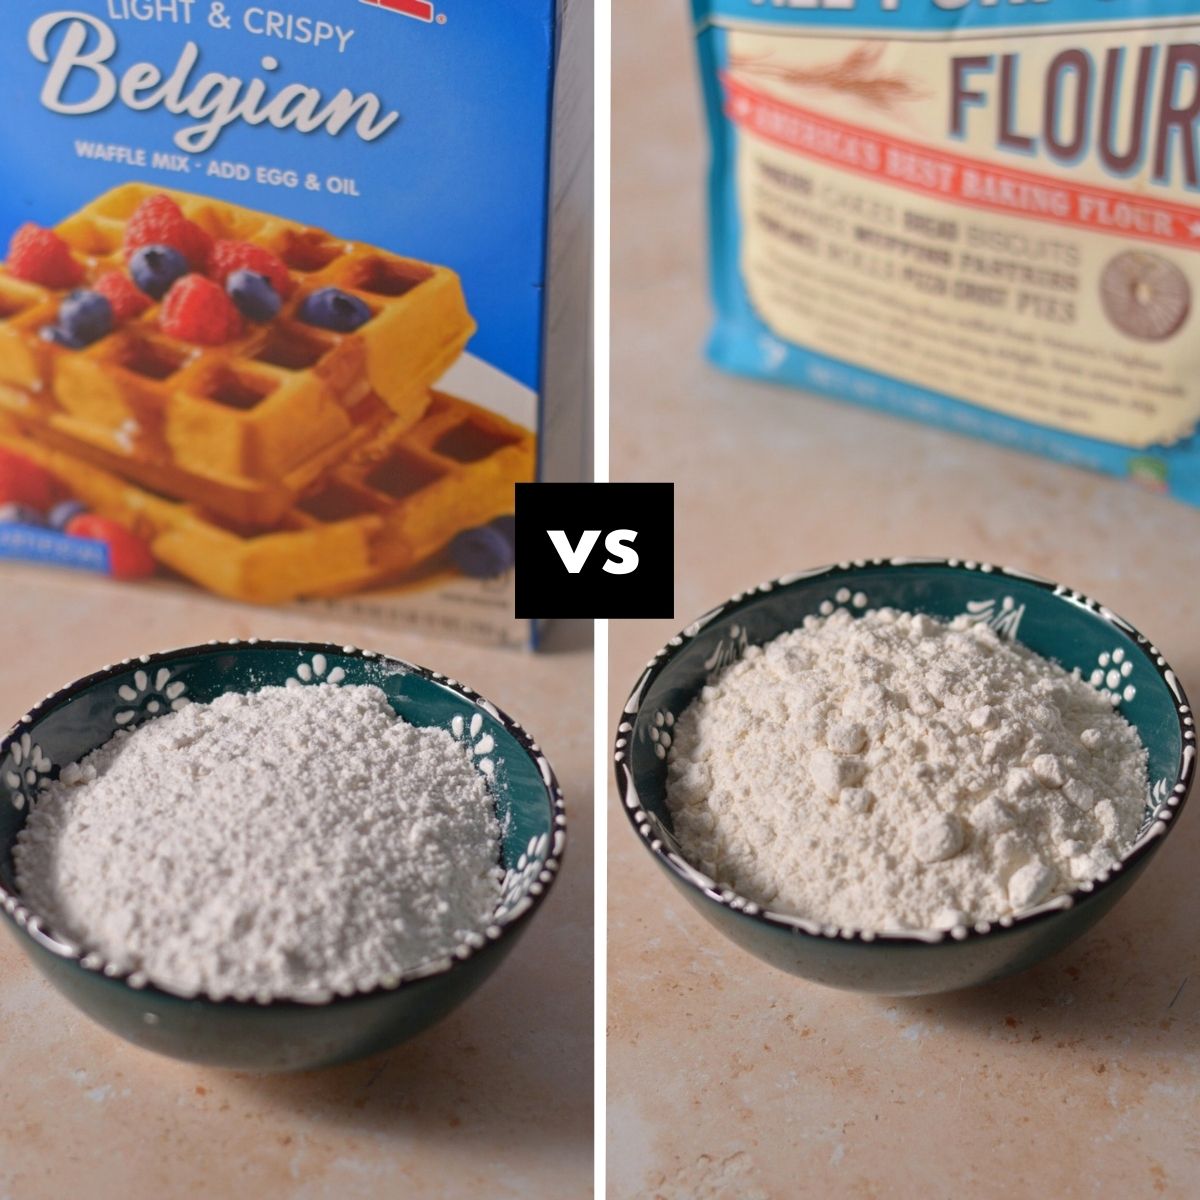 Side by side image of pancake mix in a bowl and flour in a bowl with "vs" in between.